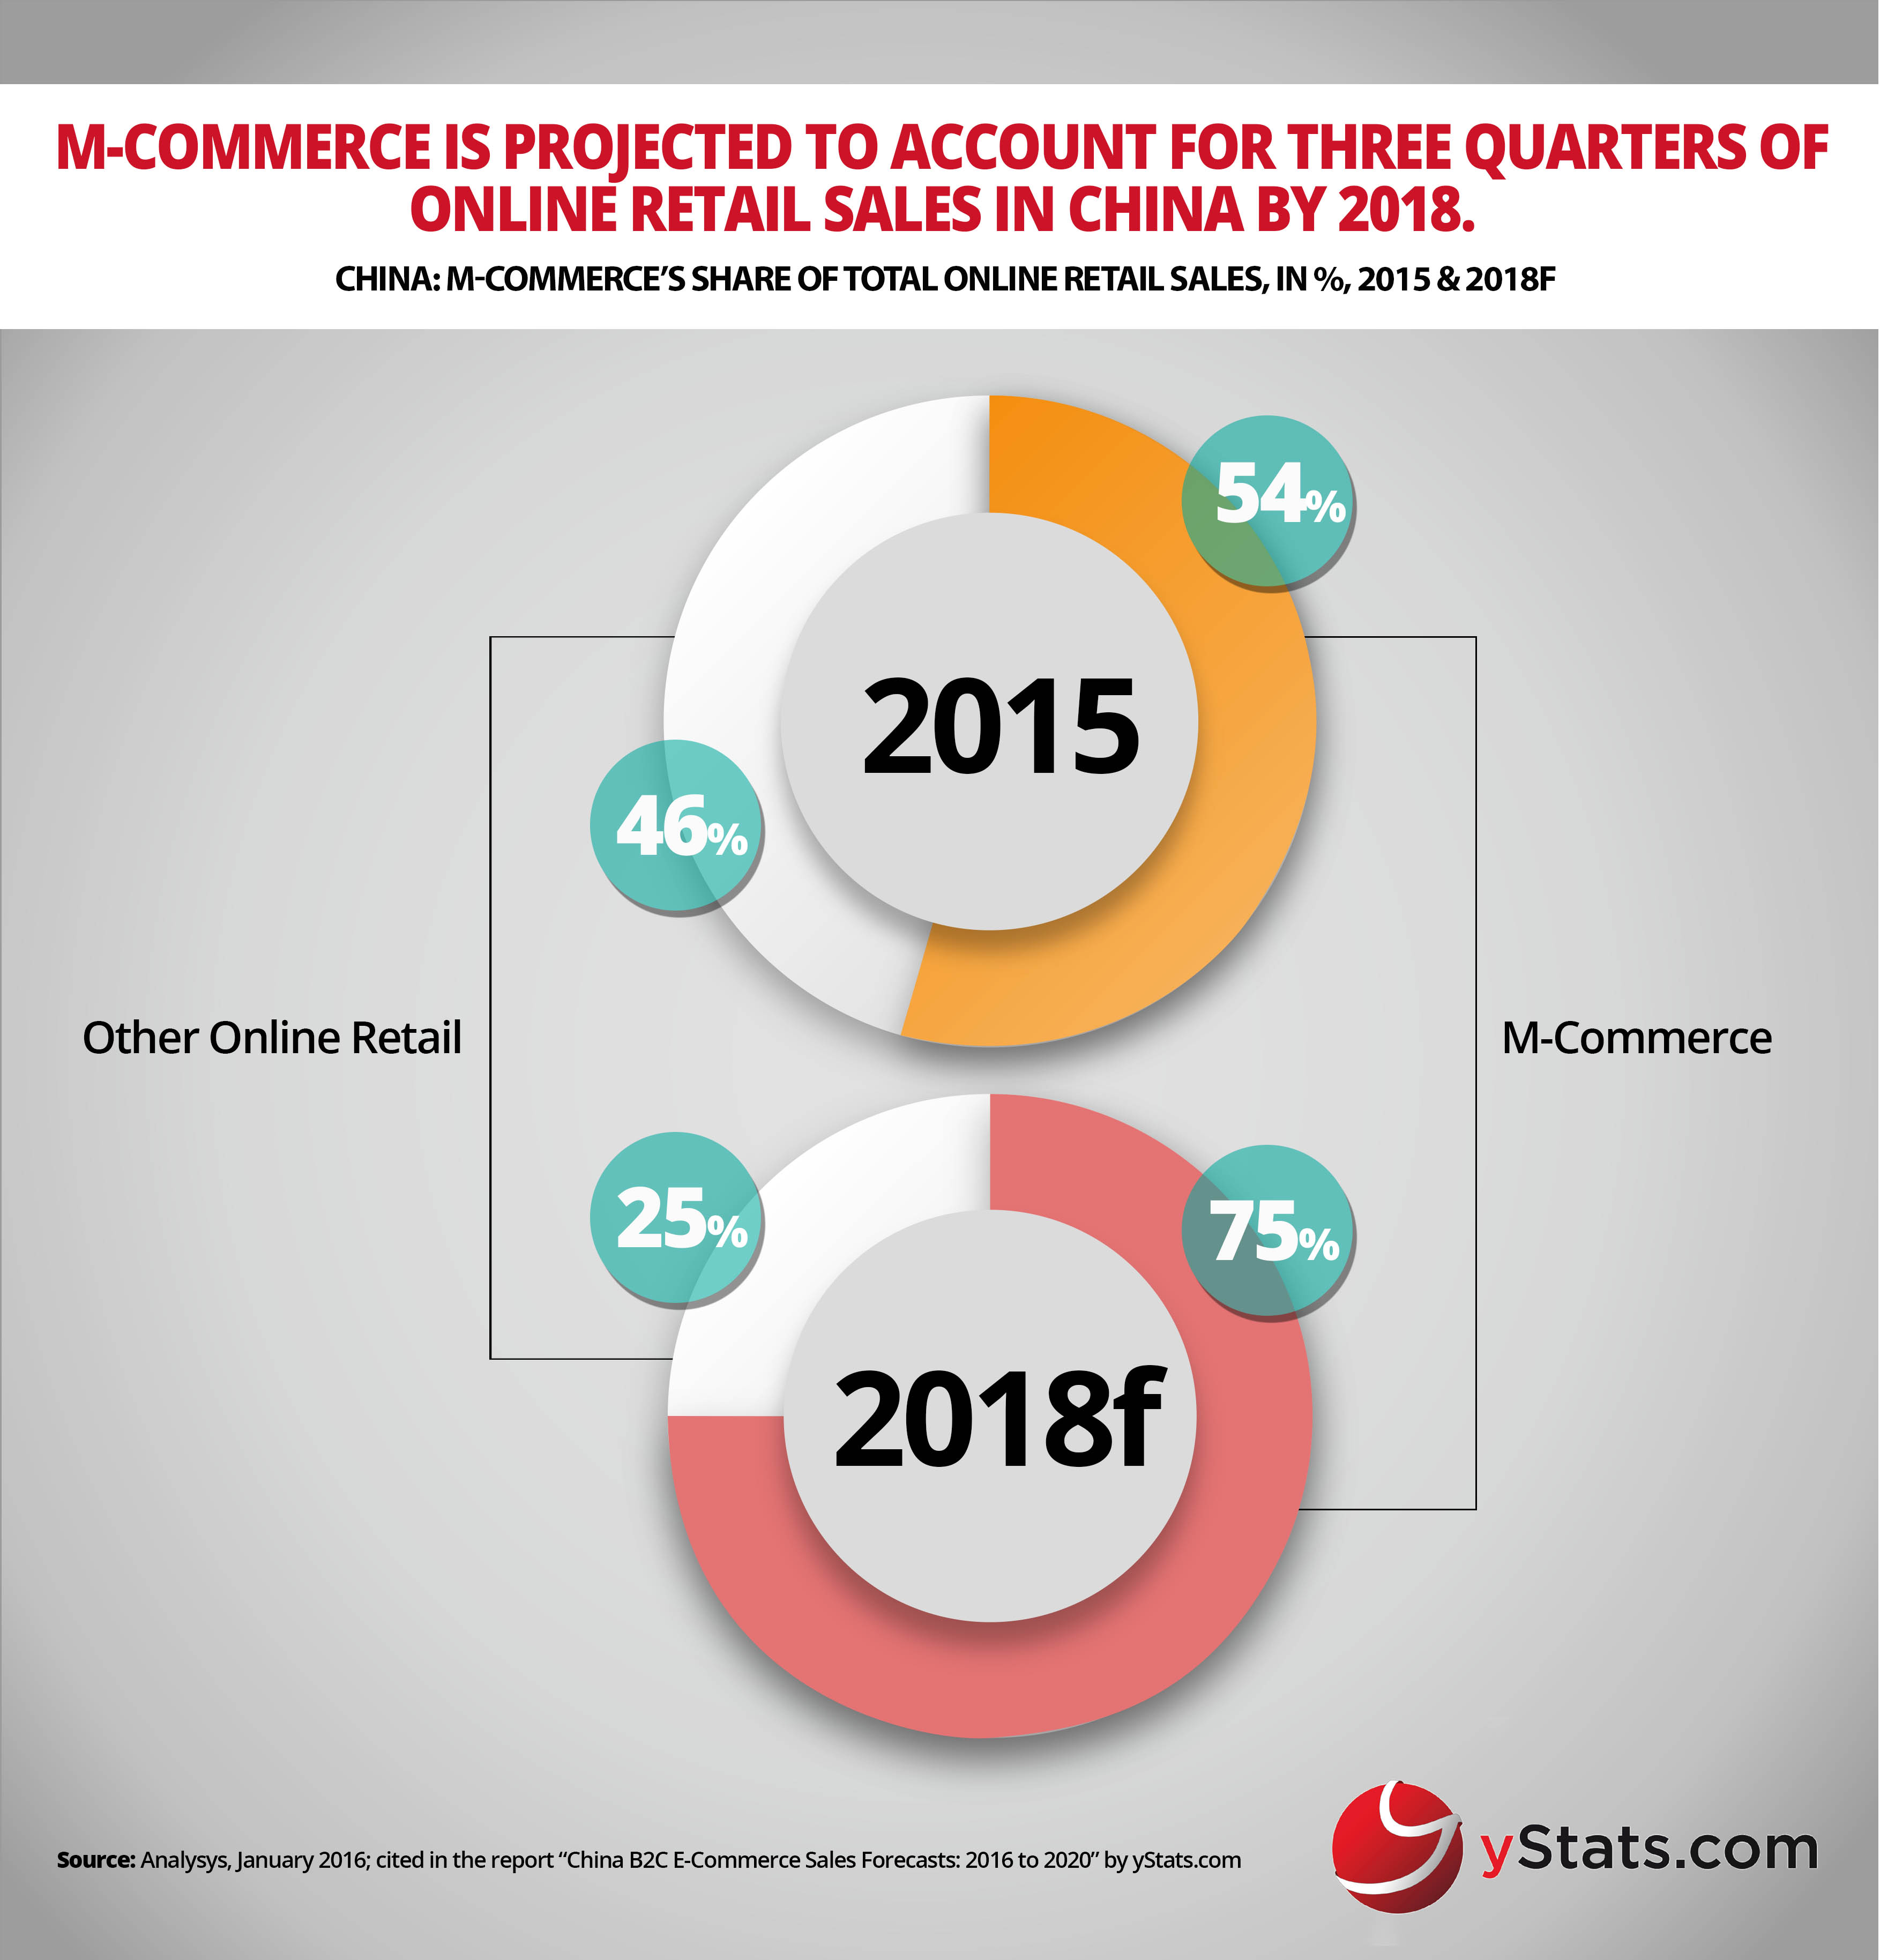 mcommerce share of total retail sales in china